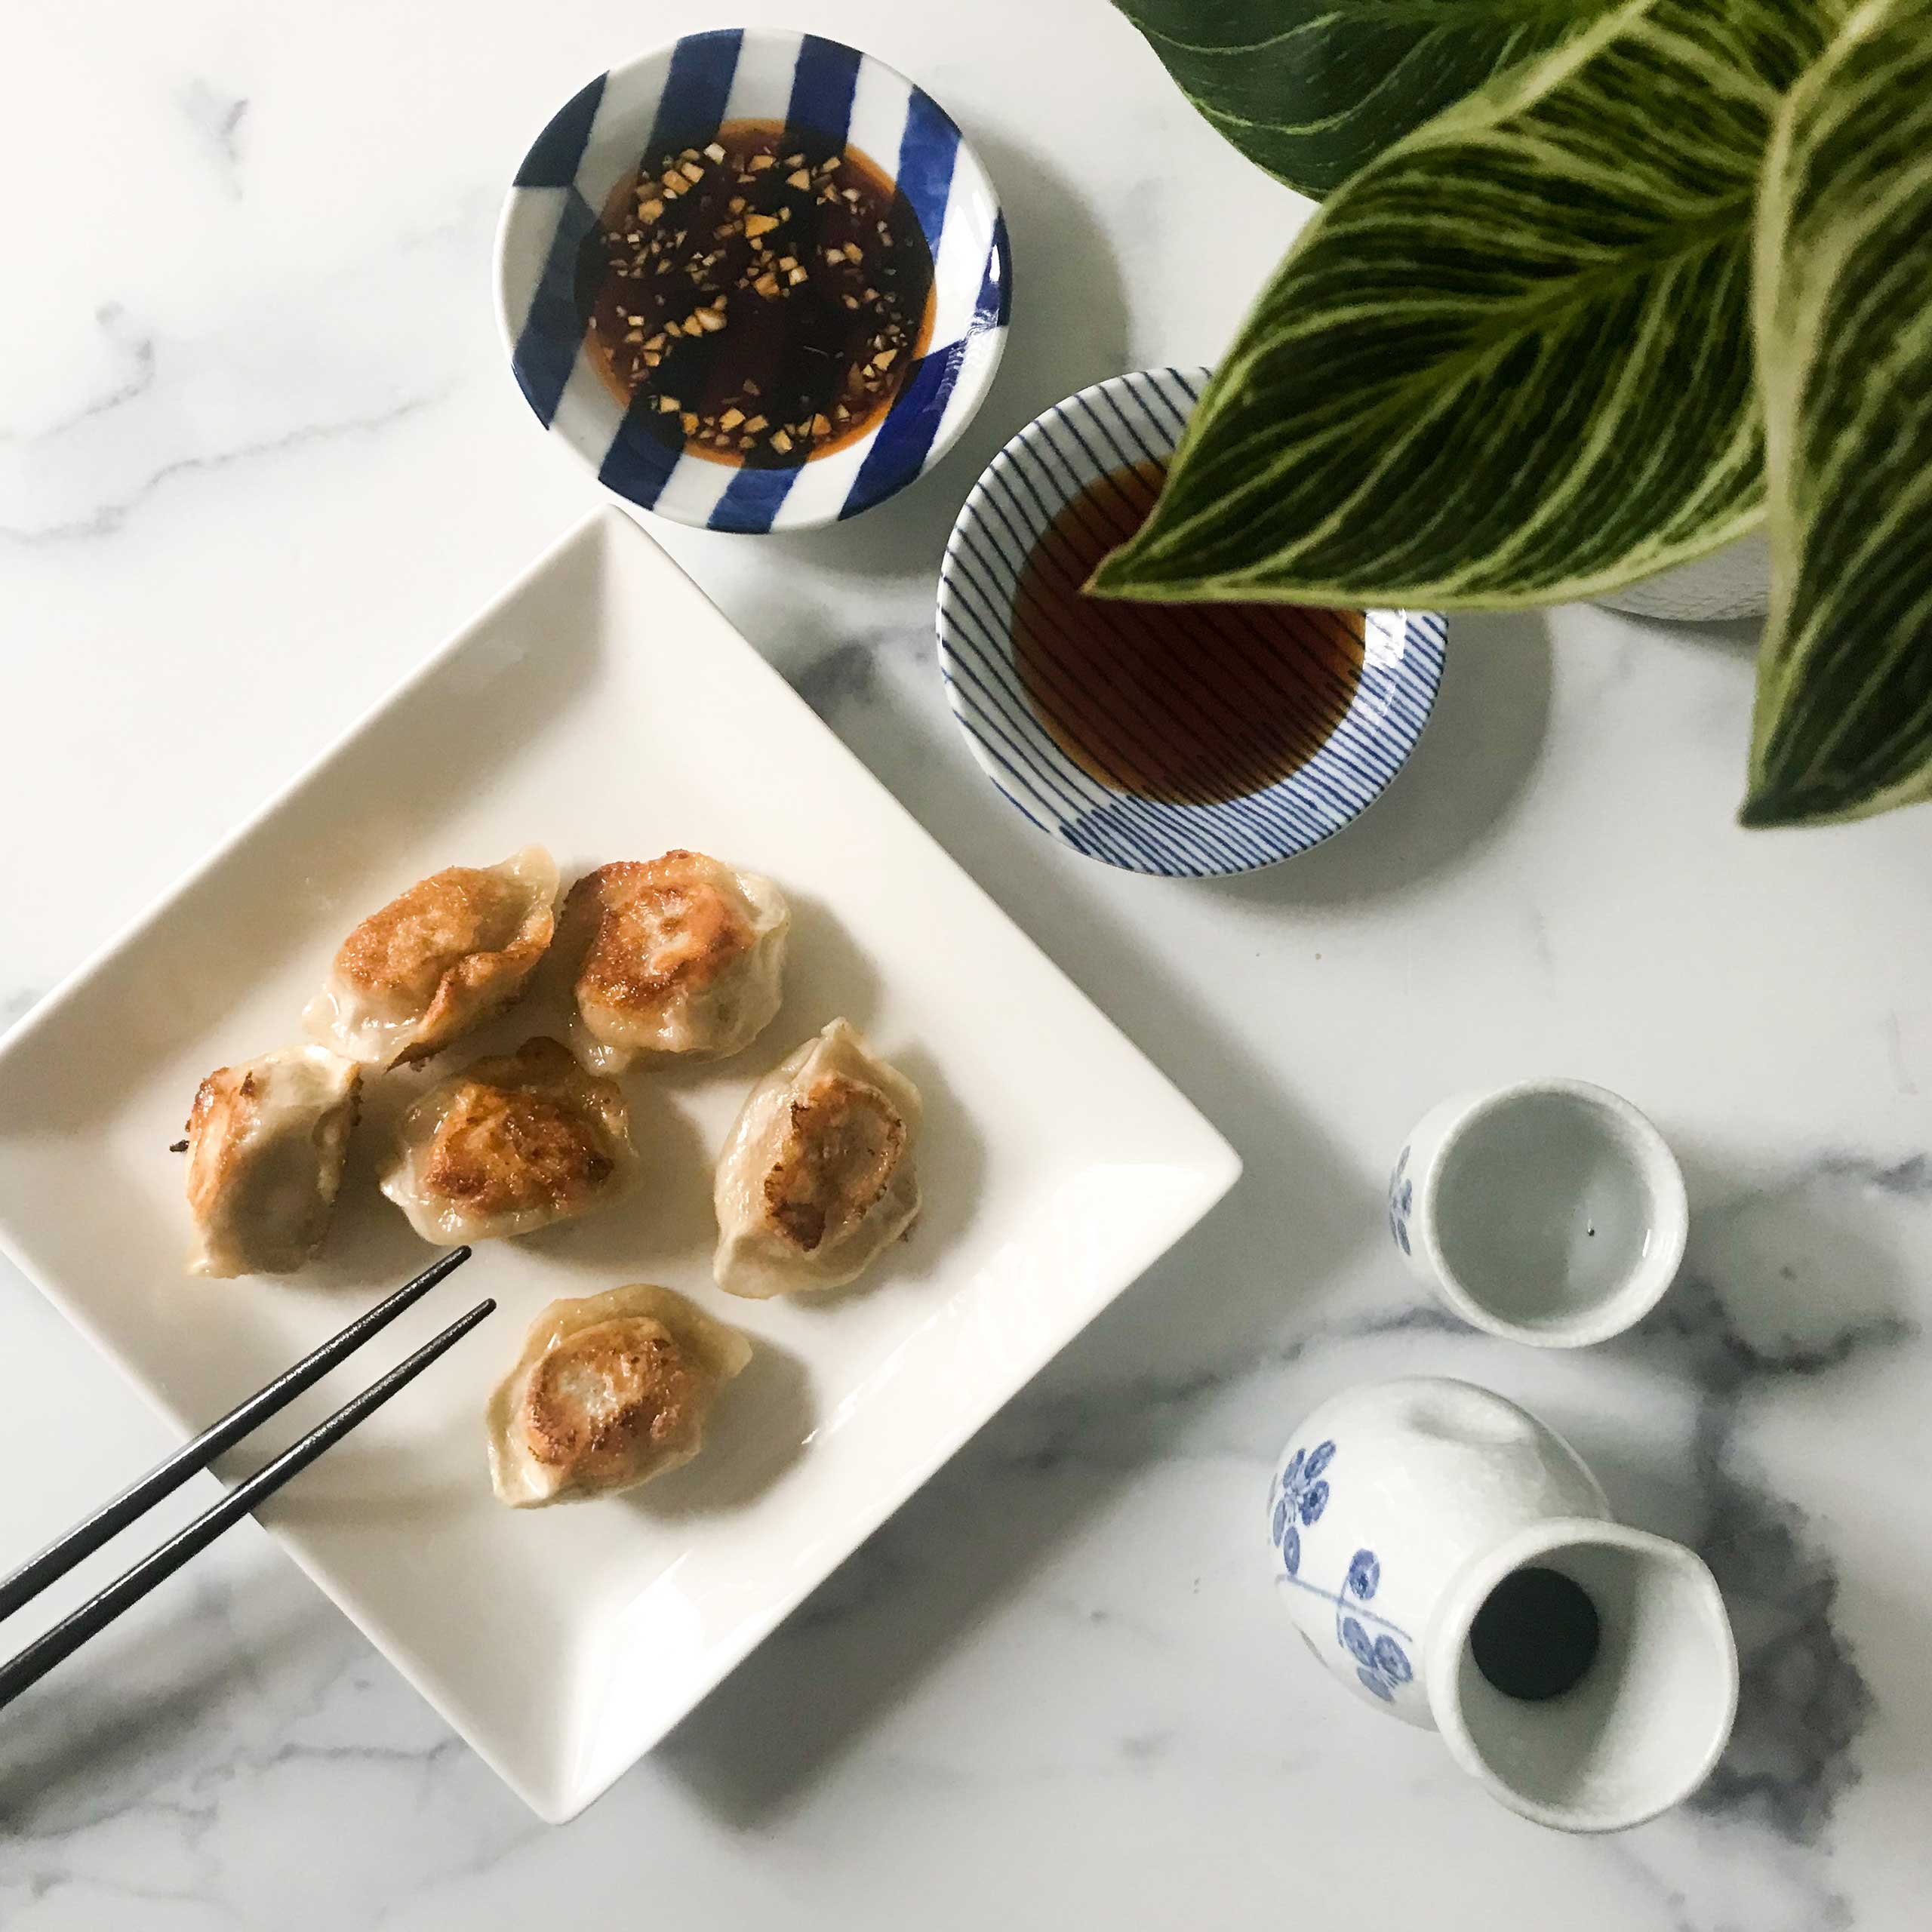 Pan-Fried-Dumplings-with-Two-Dipping-Sauces-8